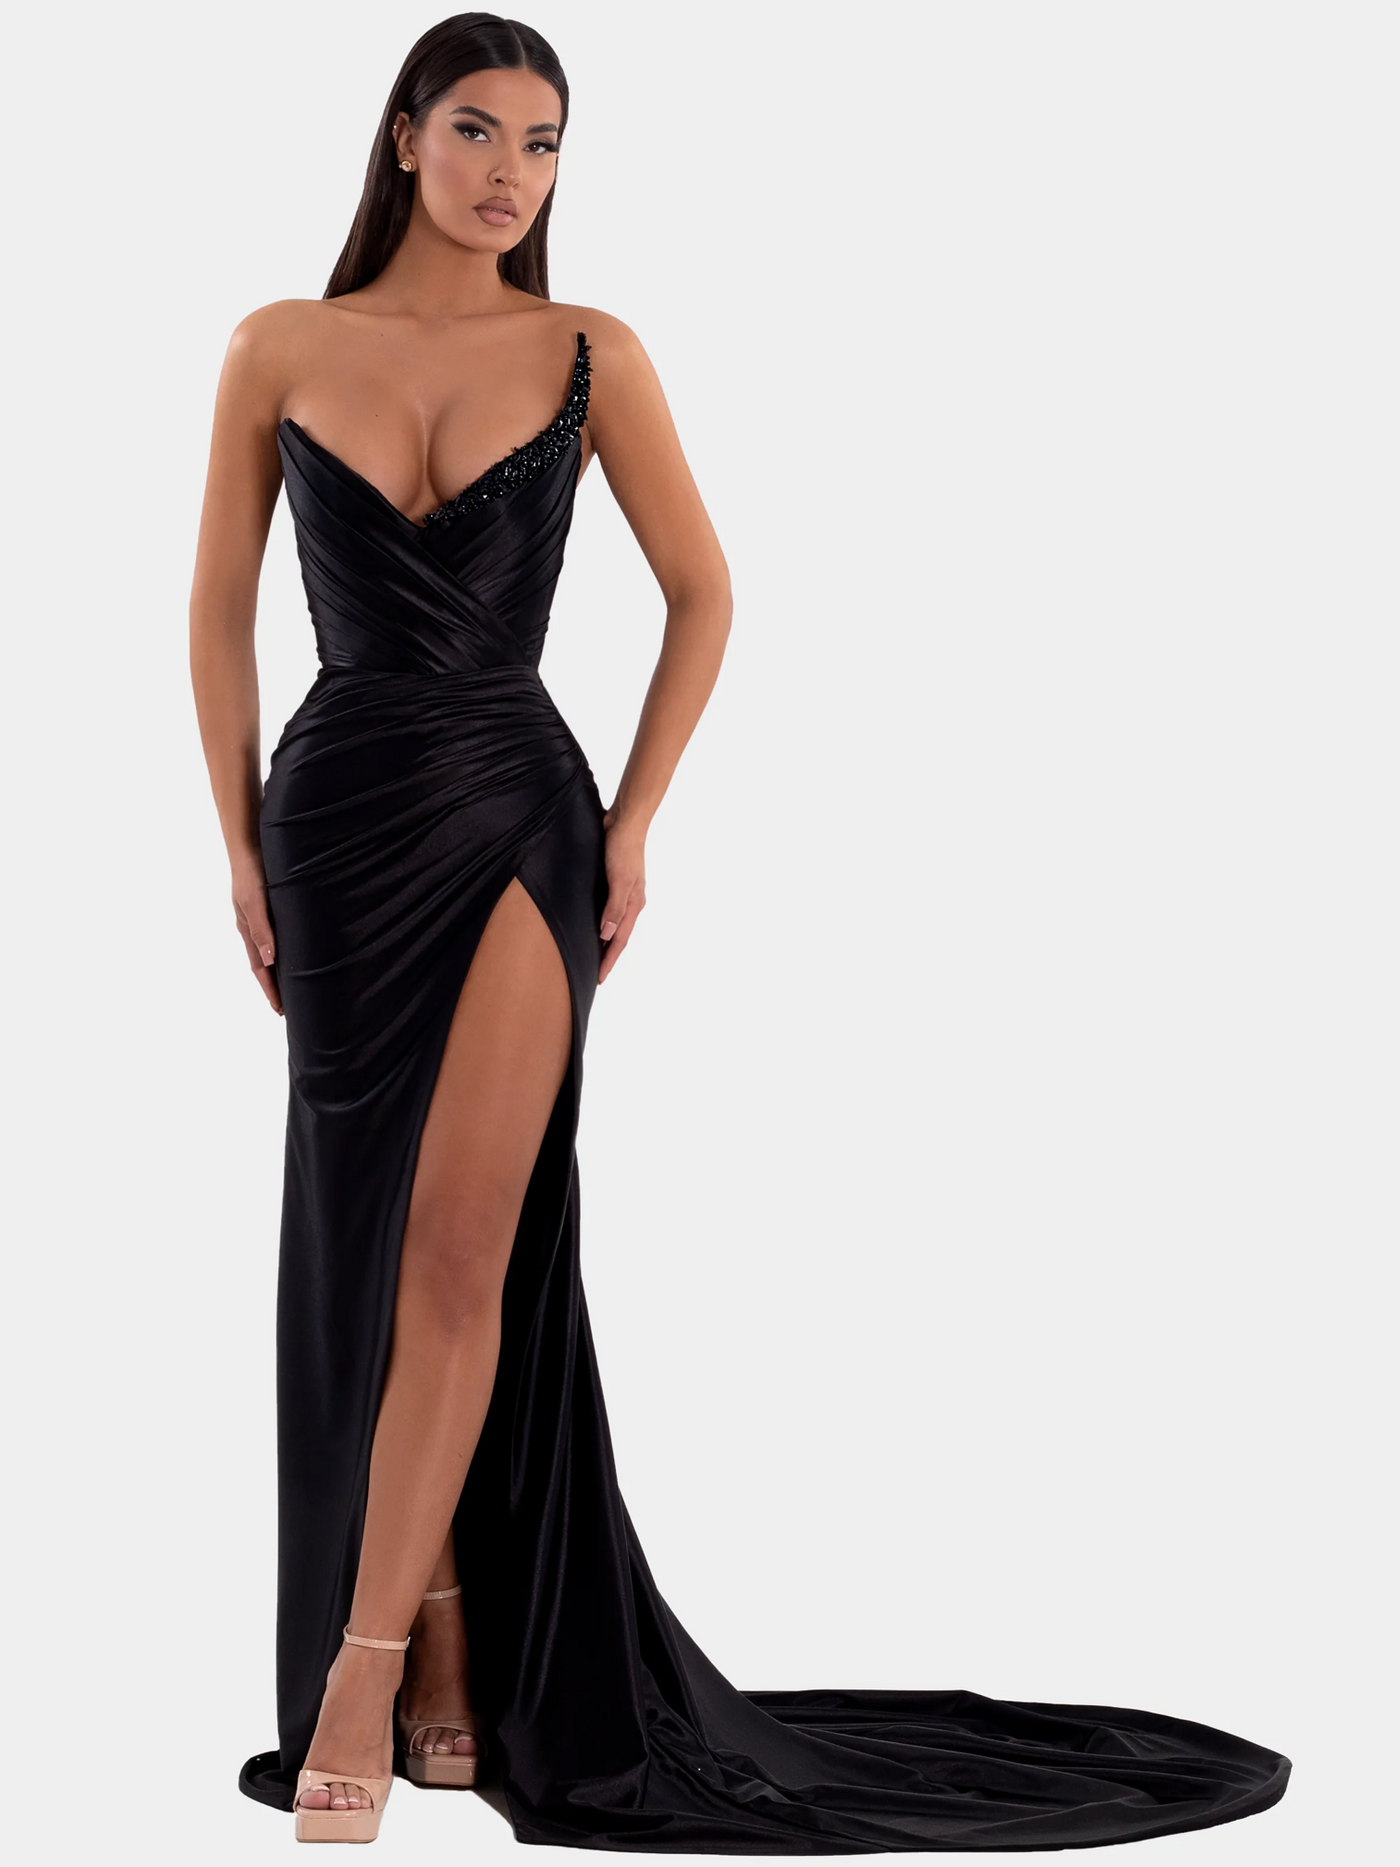 Albina Dyla Divine Gown